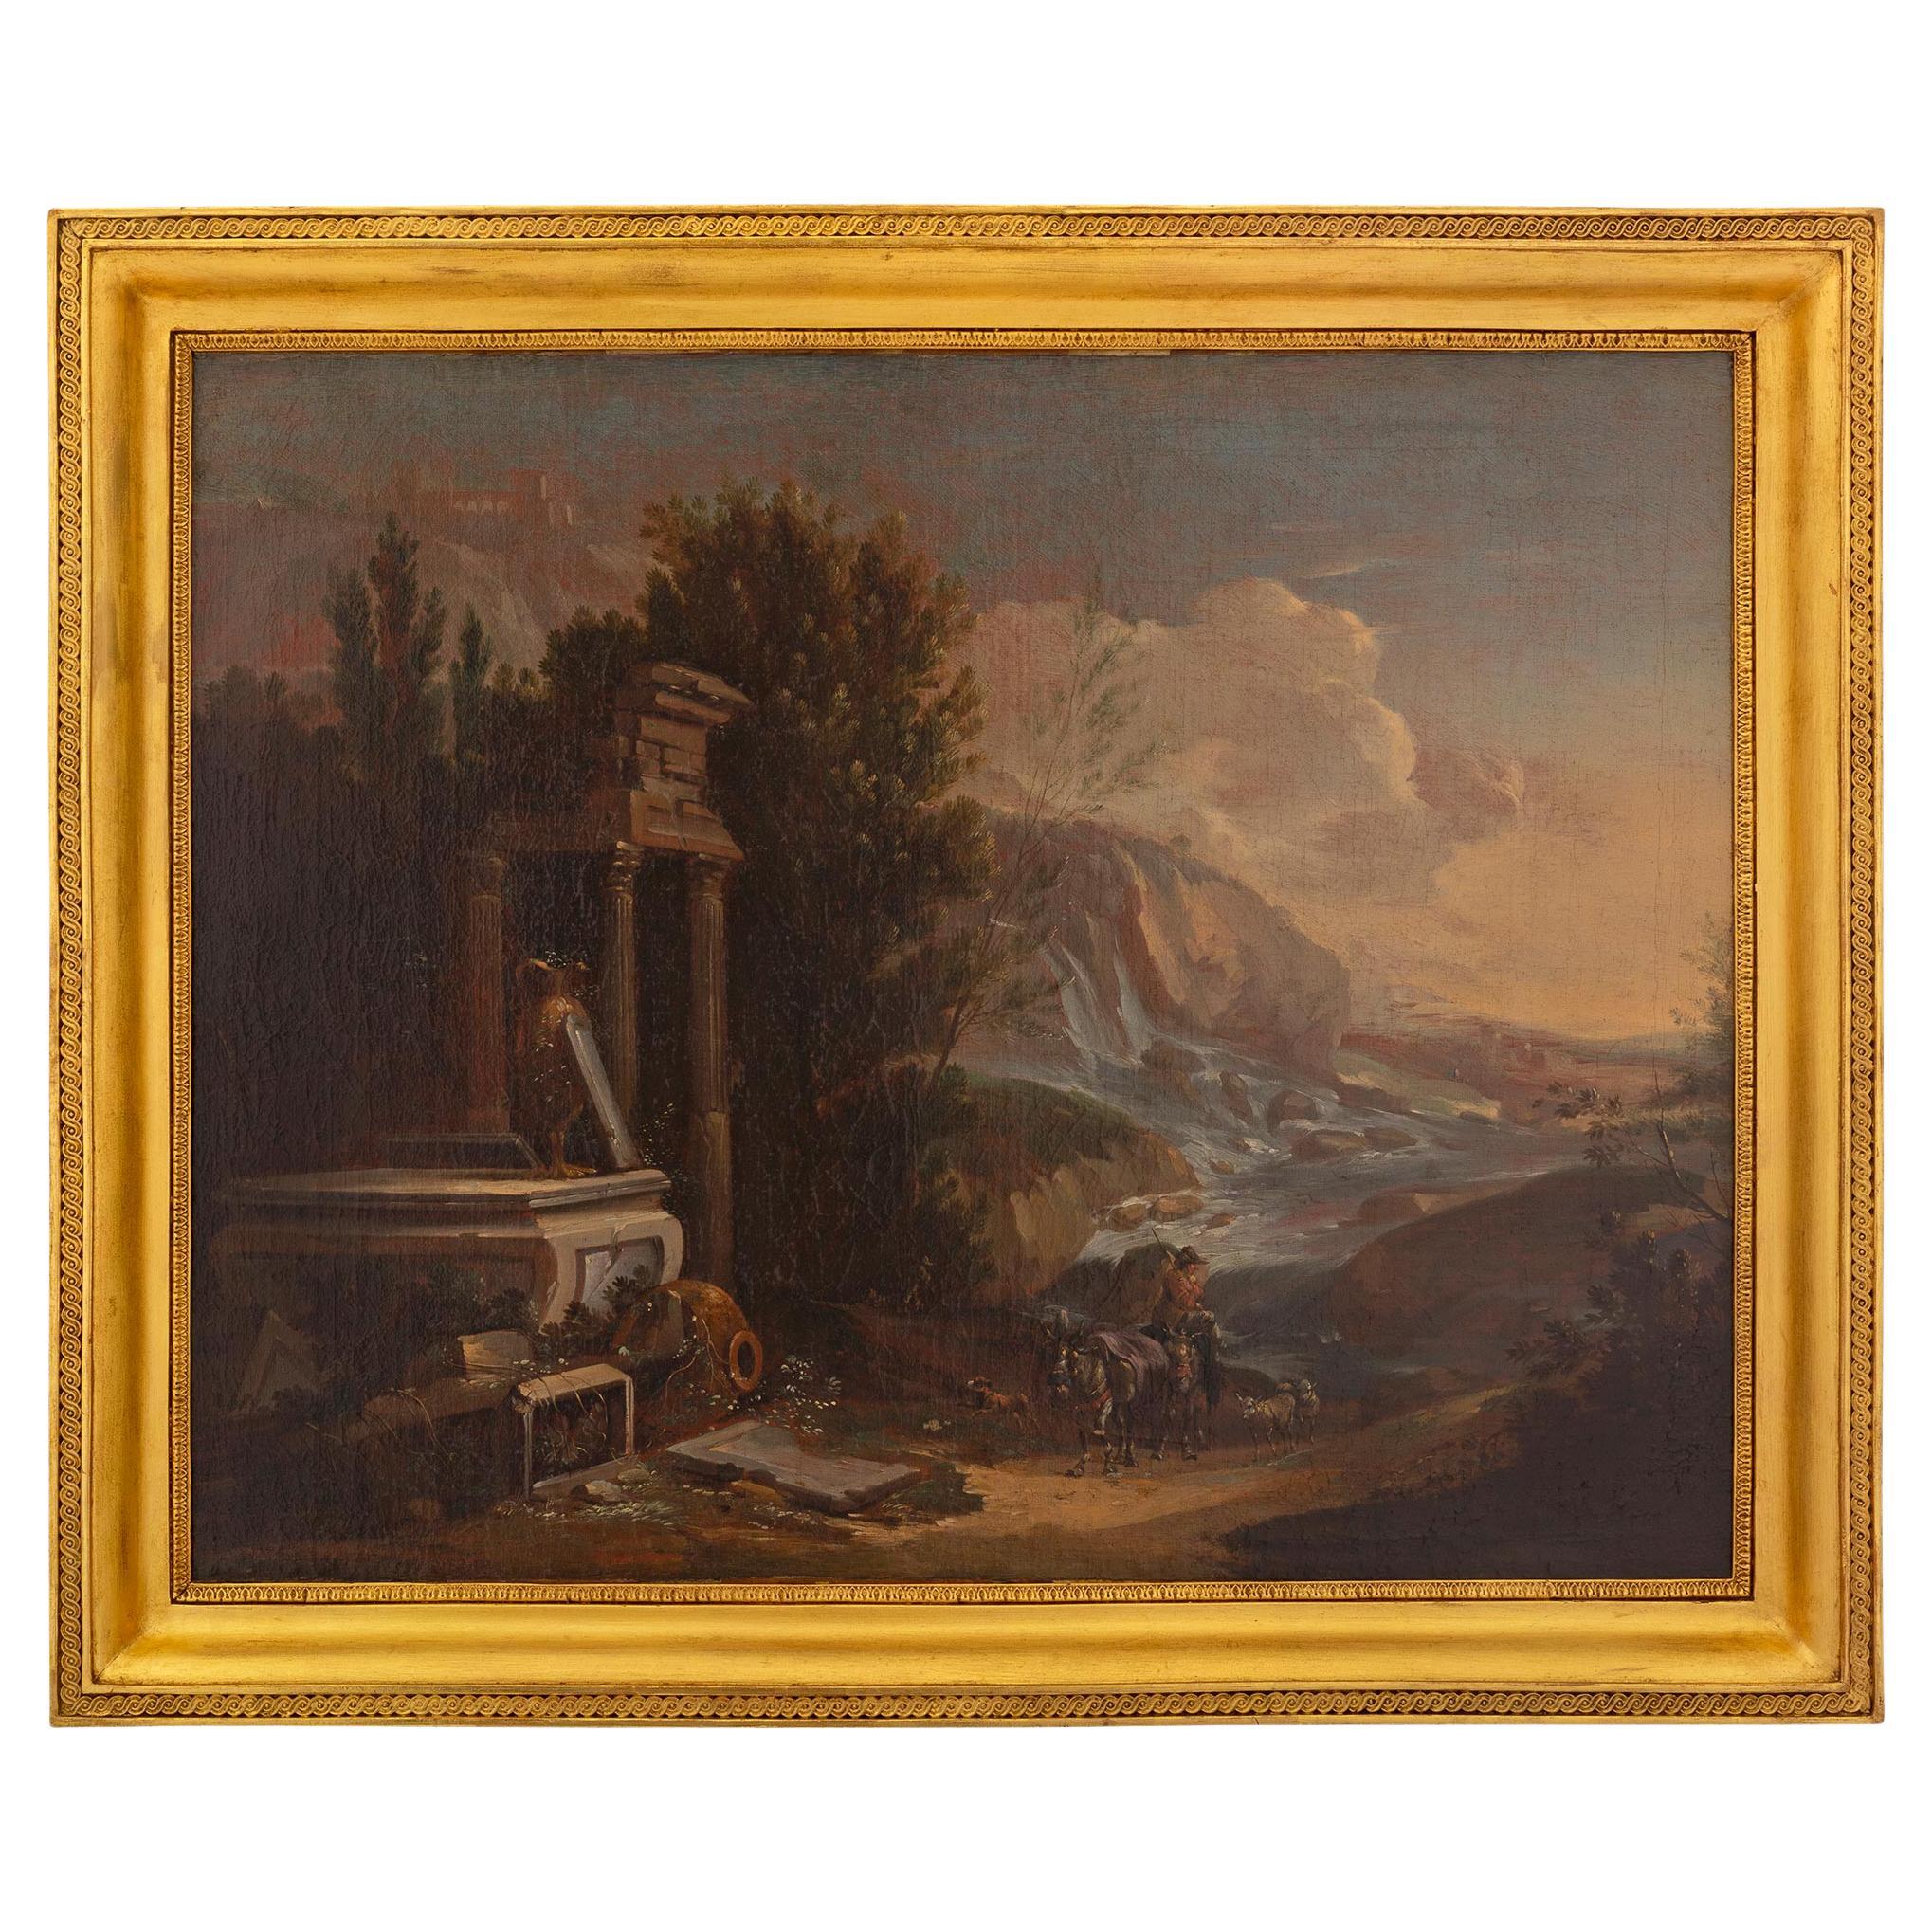 Italian 19th Century Oil on Canvas Painting in Its Original Giltwood Frame